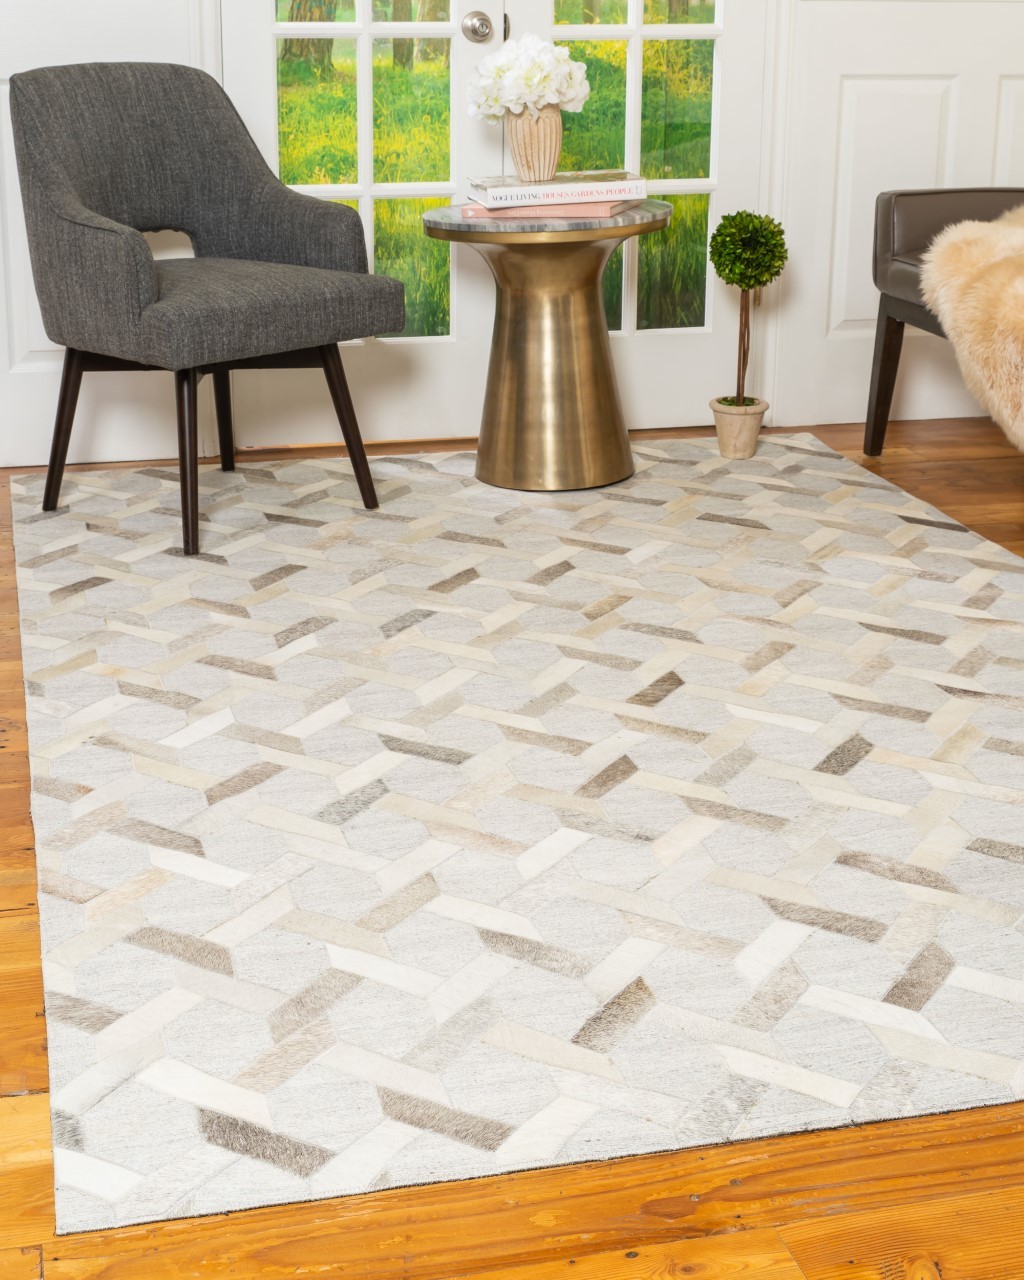 5 Ways To Use Cowhide Patchwork Rugs Buzztowns